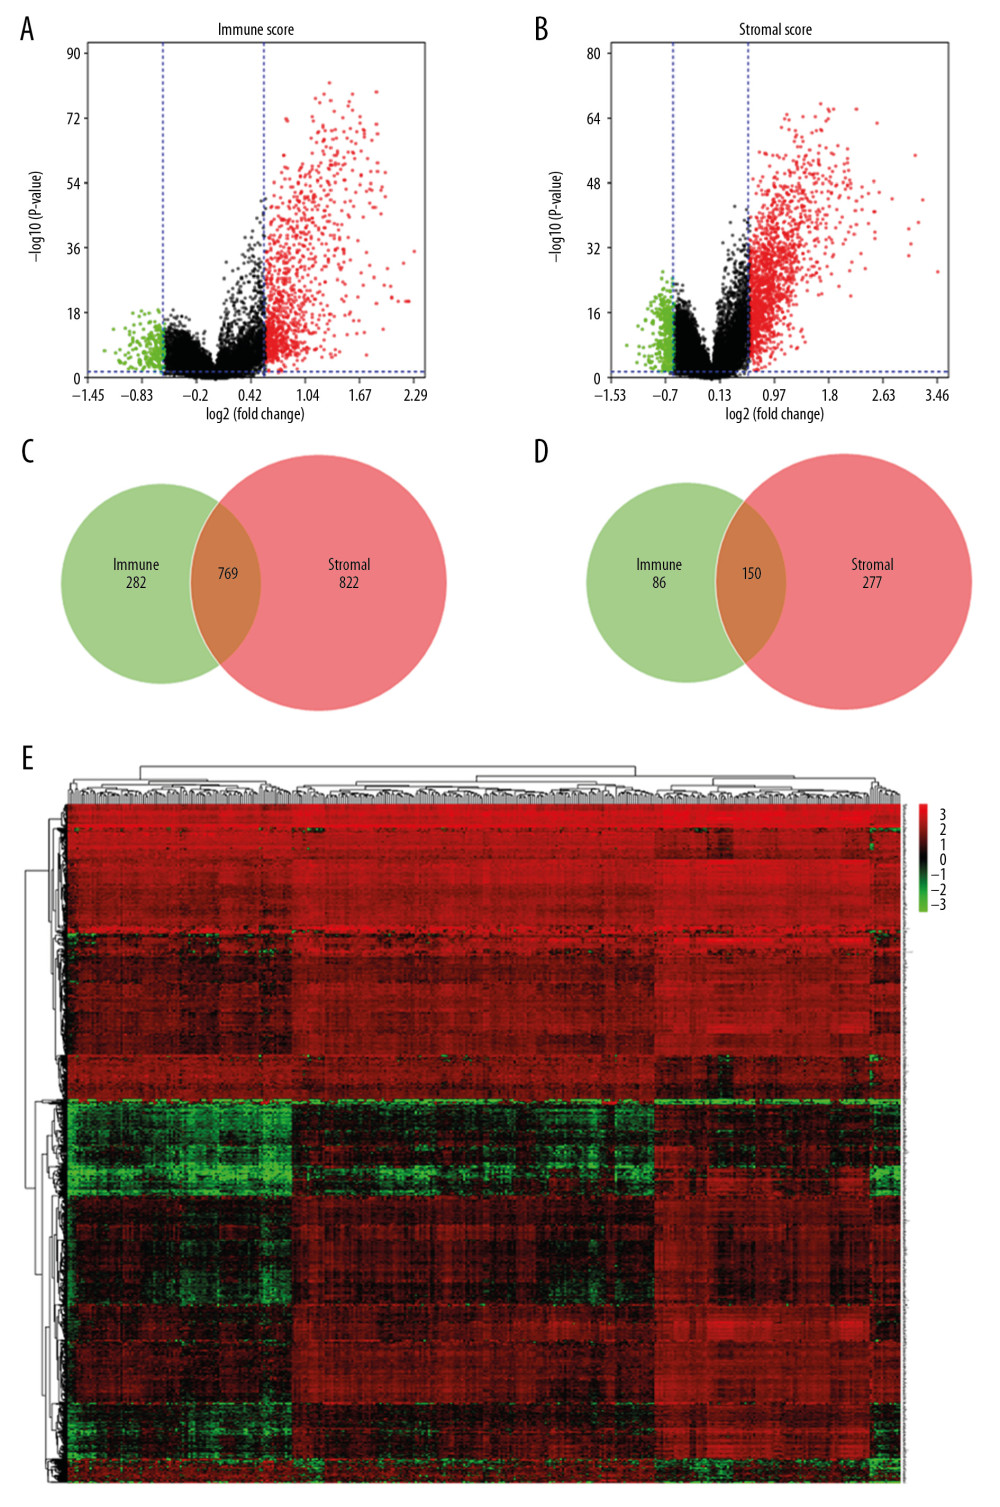 Differentially expressed genes (DEGs) with immune/stromal score in stomach adenocarcinoma (STAD). (A) According to immune score, 1051 genes were high-expressed and 236 genes down-expressed in the high score group compared with the low score group (B) Similarly, 1591 high-expressed genes and 427 down-expressed genes were obtained based on stromal score. (C, D) In total, 769 DEGs were synchronously high-expressed in both the high score groups, while 150 genes were commonly down-expressed. (E) Heat map including 919 DEGs showed distinct gene expression profiles in STAD.